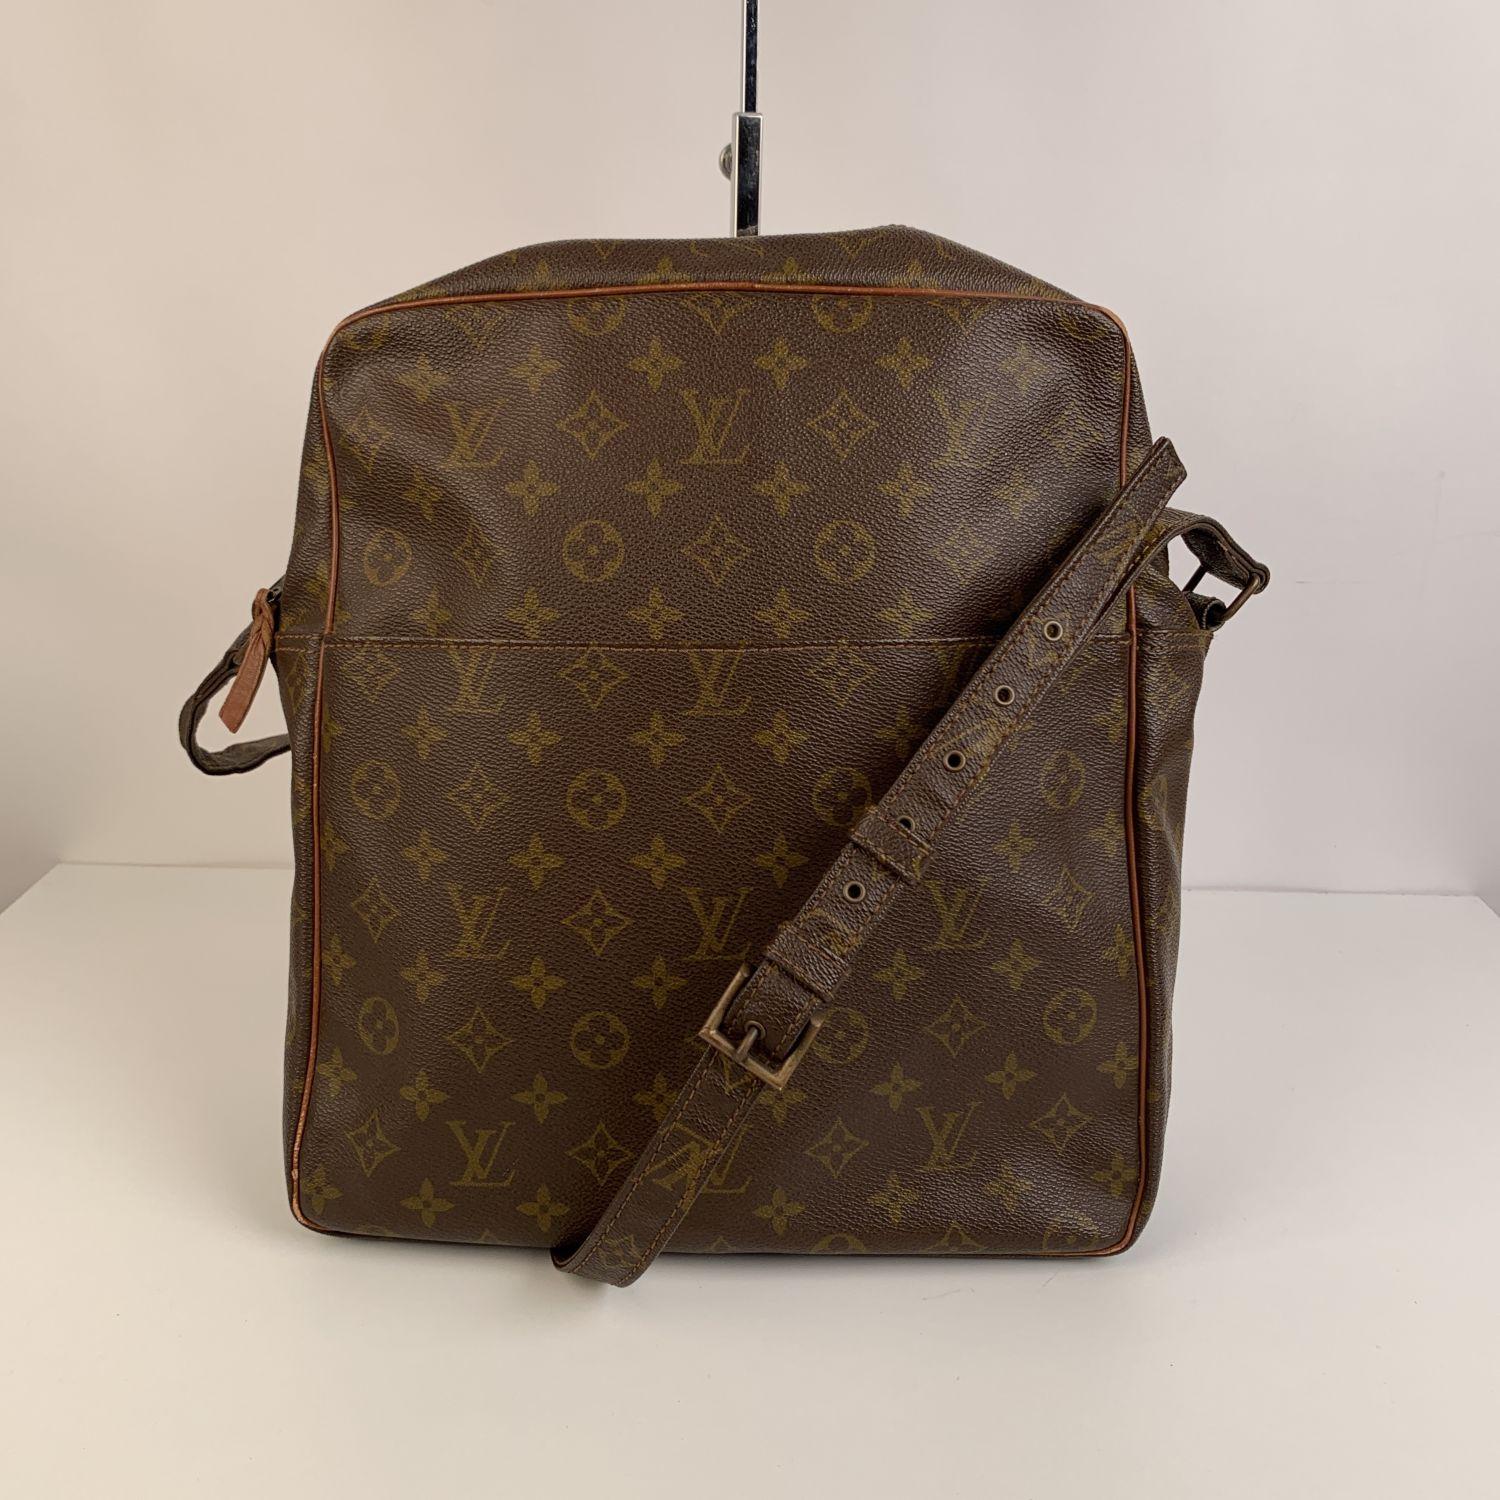 This beautiful Bag will come with a Certificate of Authenticity provided by Entrupy, leading International Fashion Authenticators. The certificate will be provided at no further cost.

LOUIS VUITTON Vintage monogram canvas Marceau GM crafted in